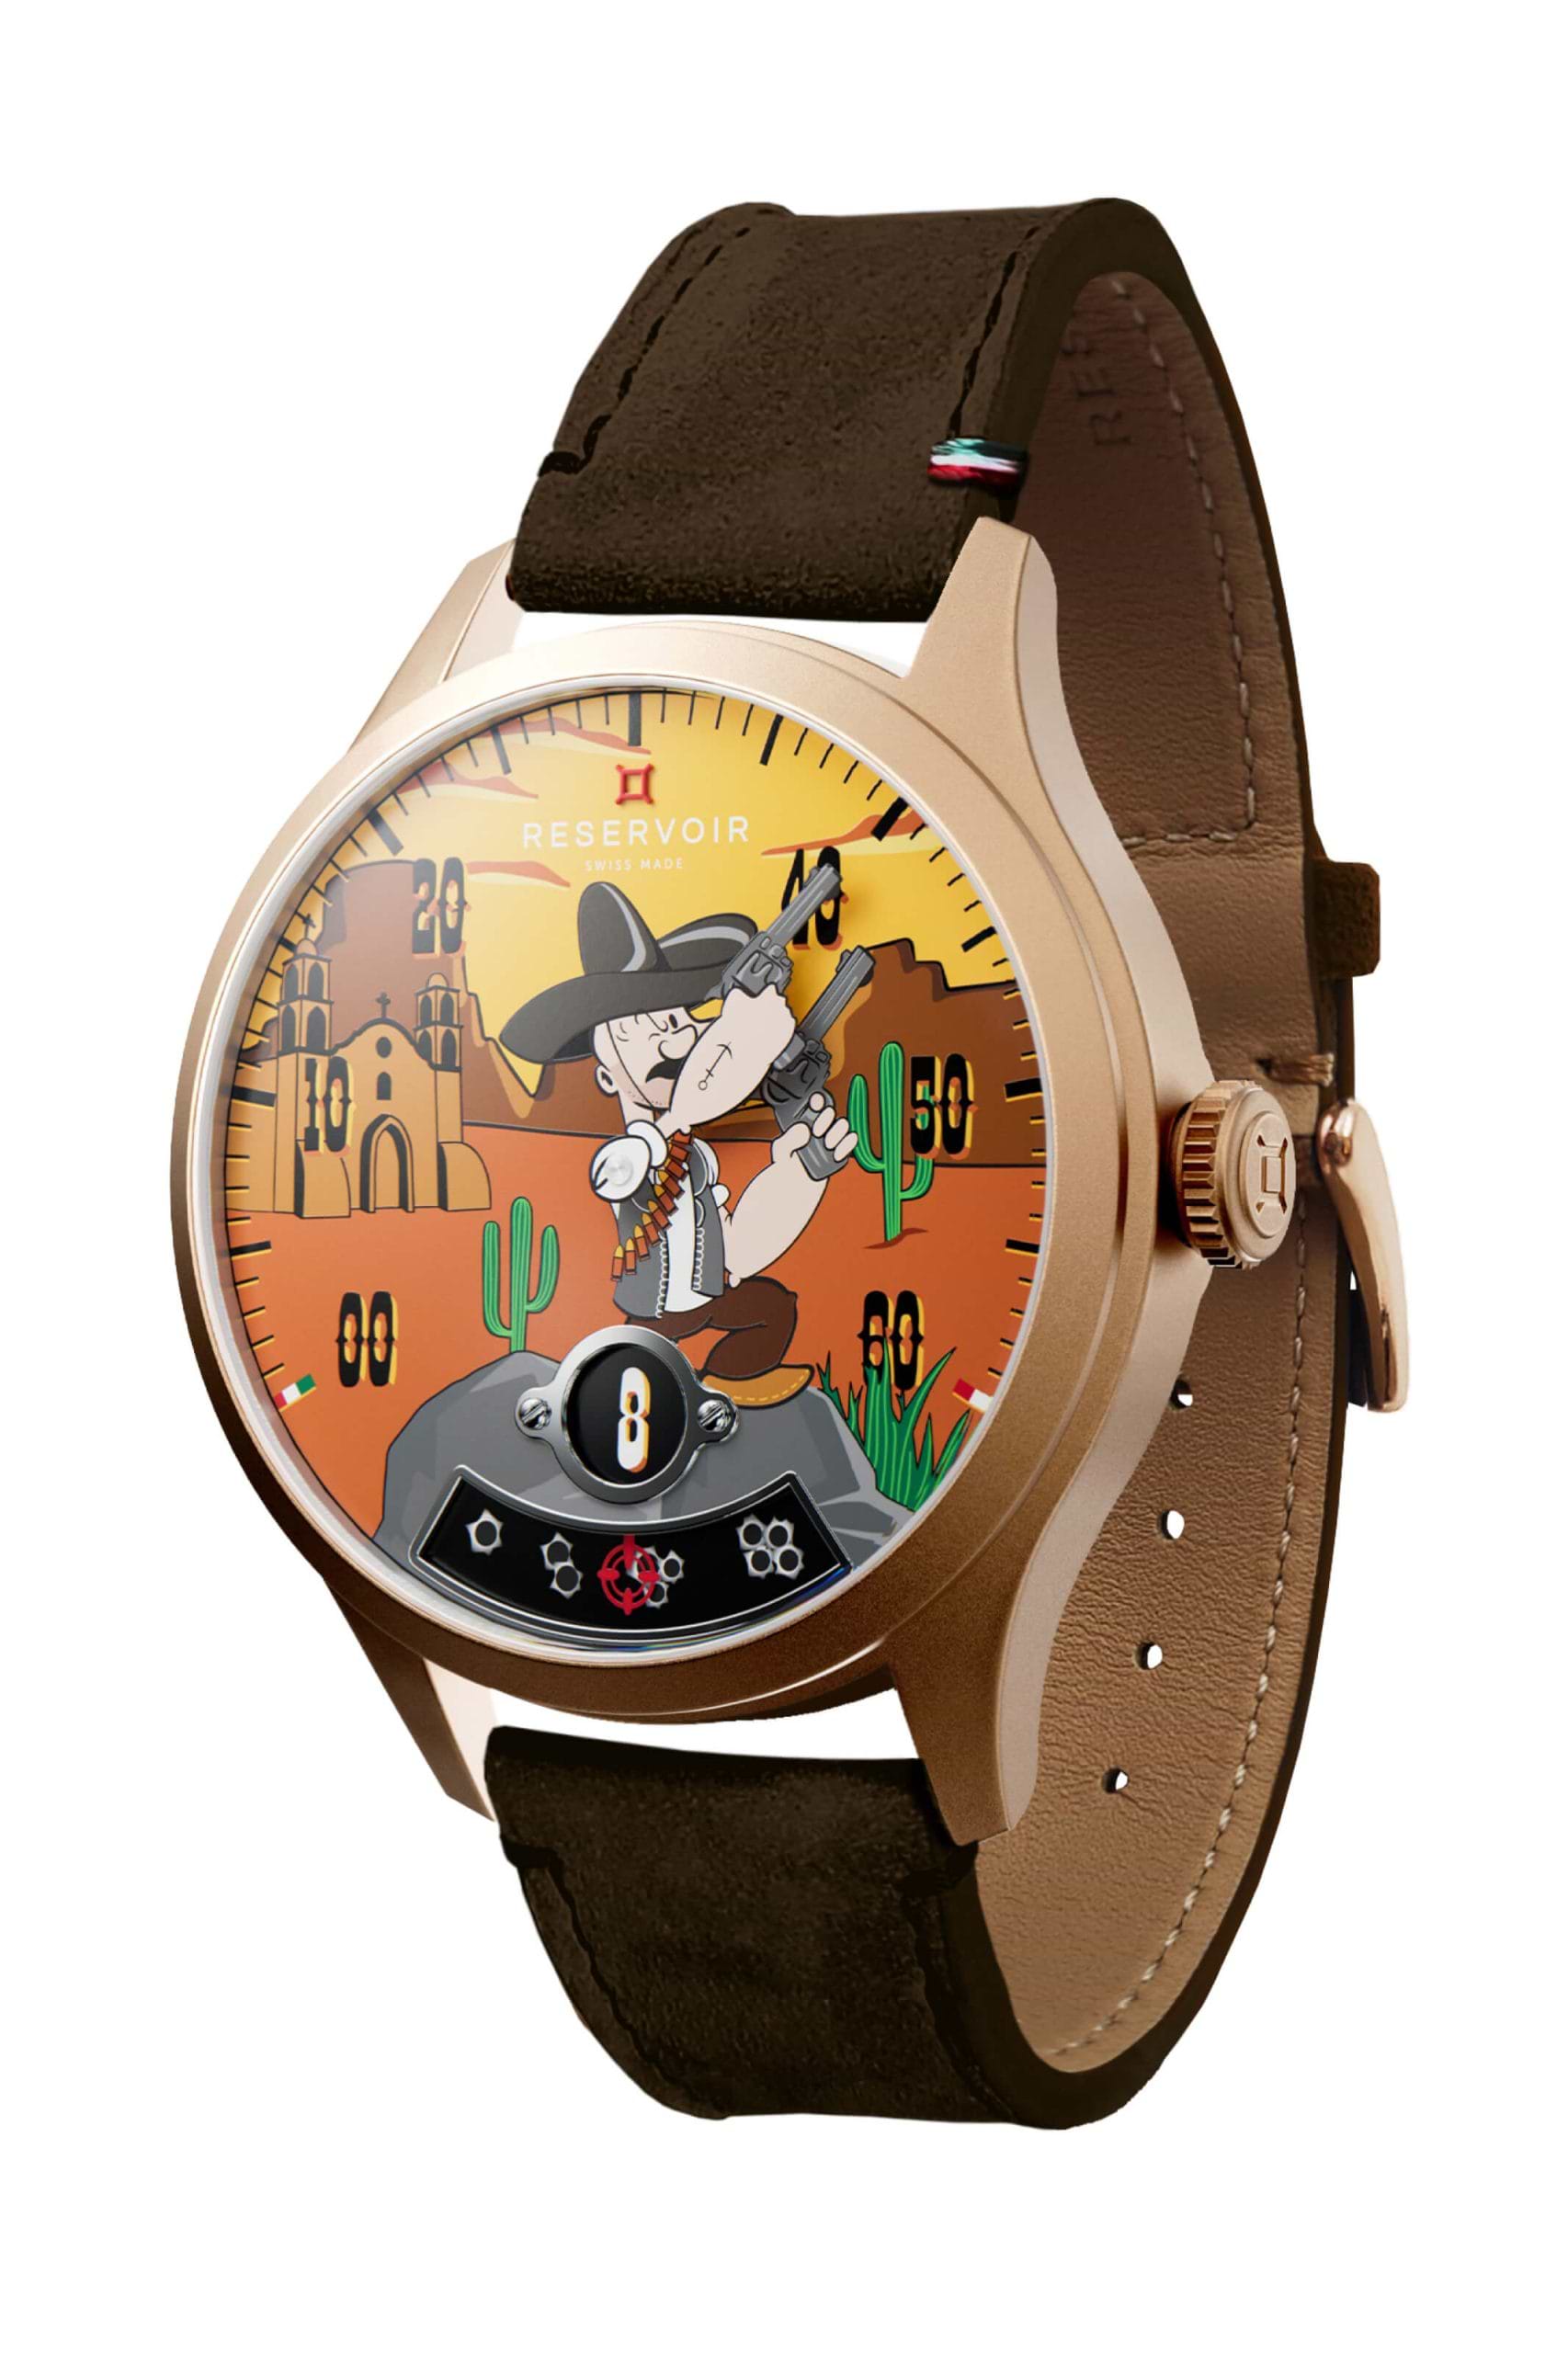 Popeye comics in Mexico: Dark Brown, Light Peach, and Light Olive Green RESERVOIR watch